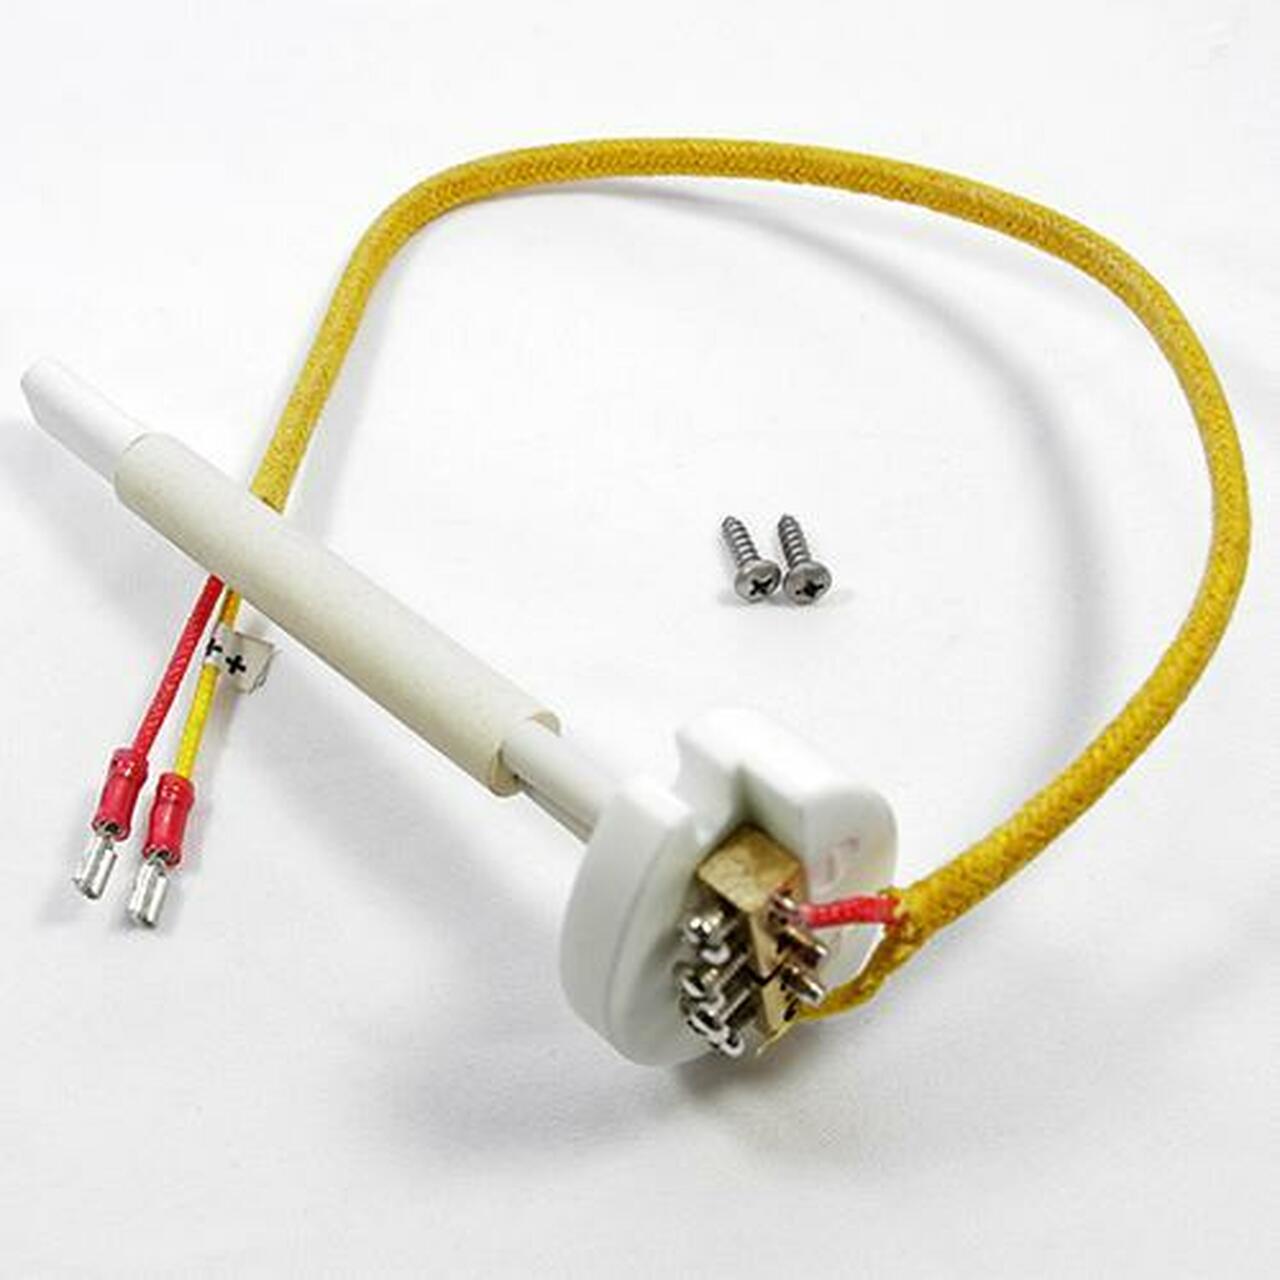 TYPE K THERMOCOUPLE REPLACEMENT w/Block & Wire